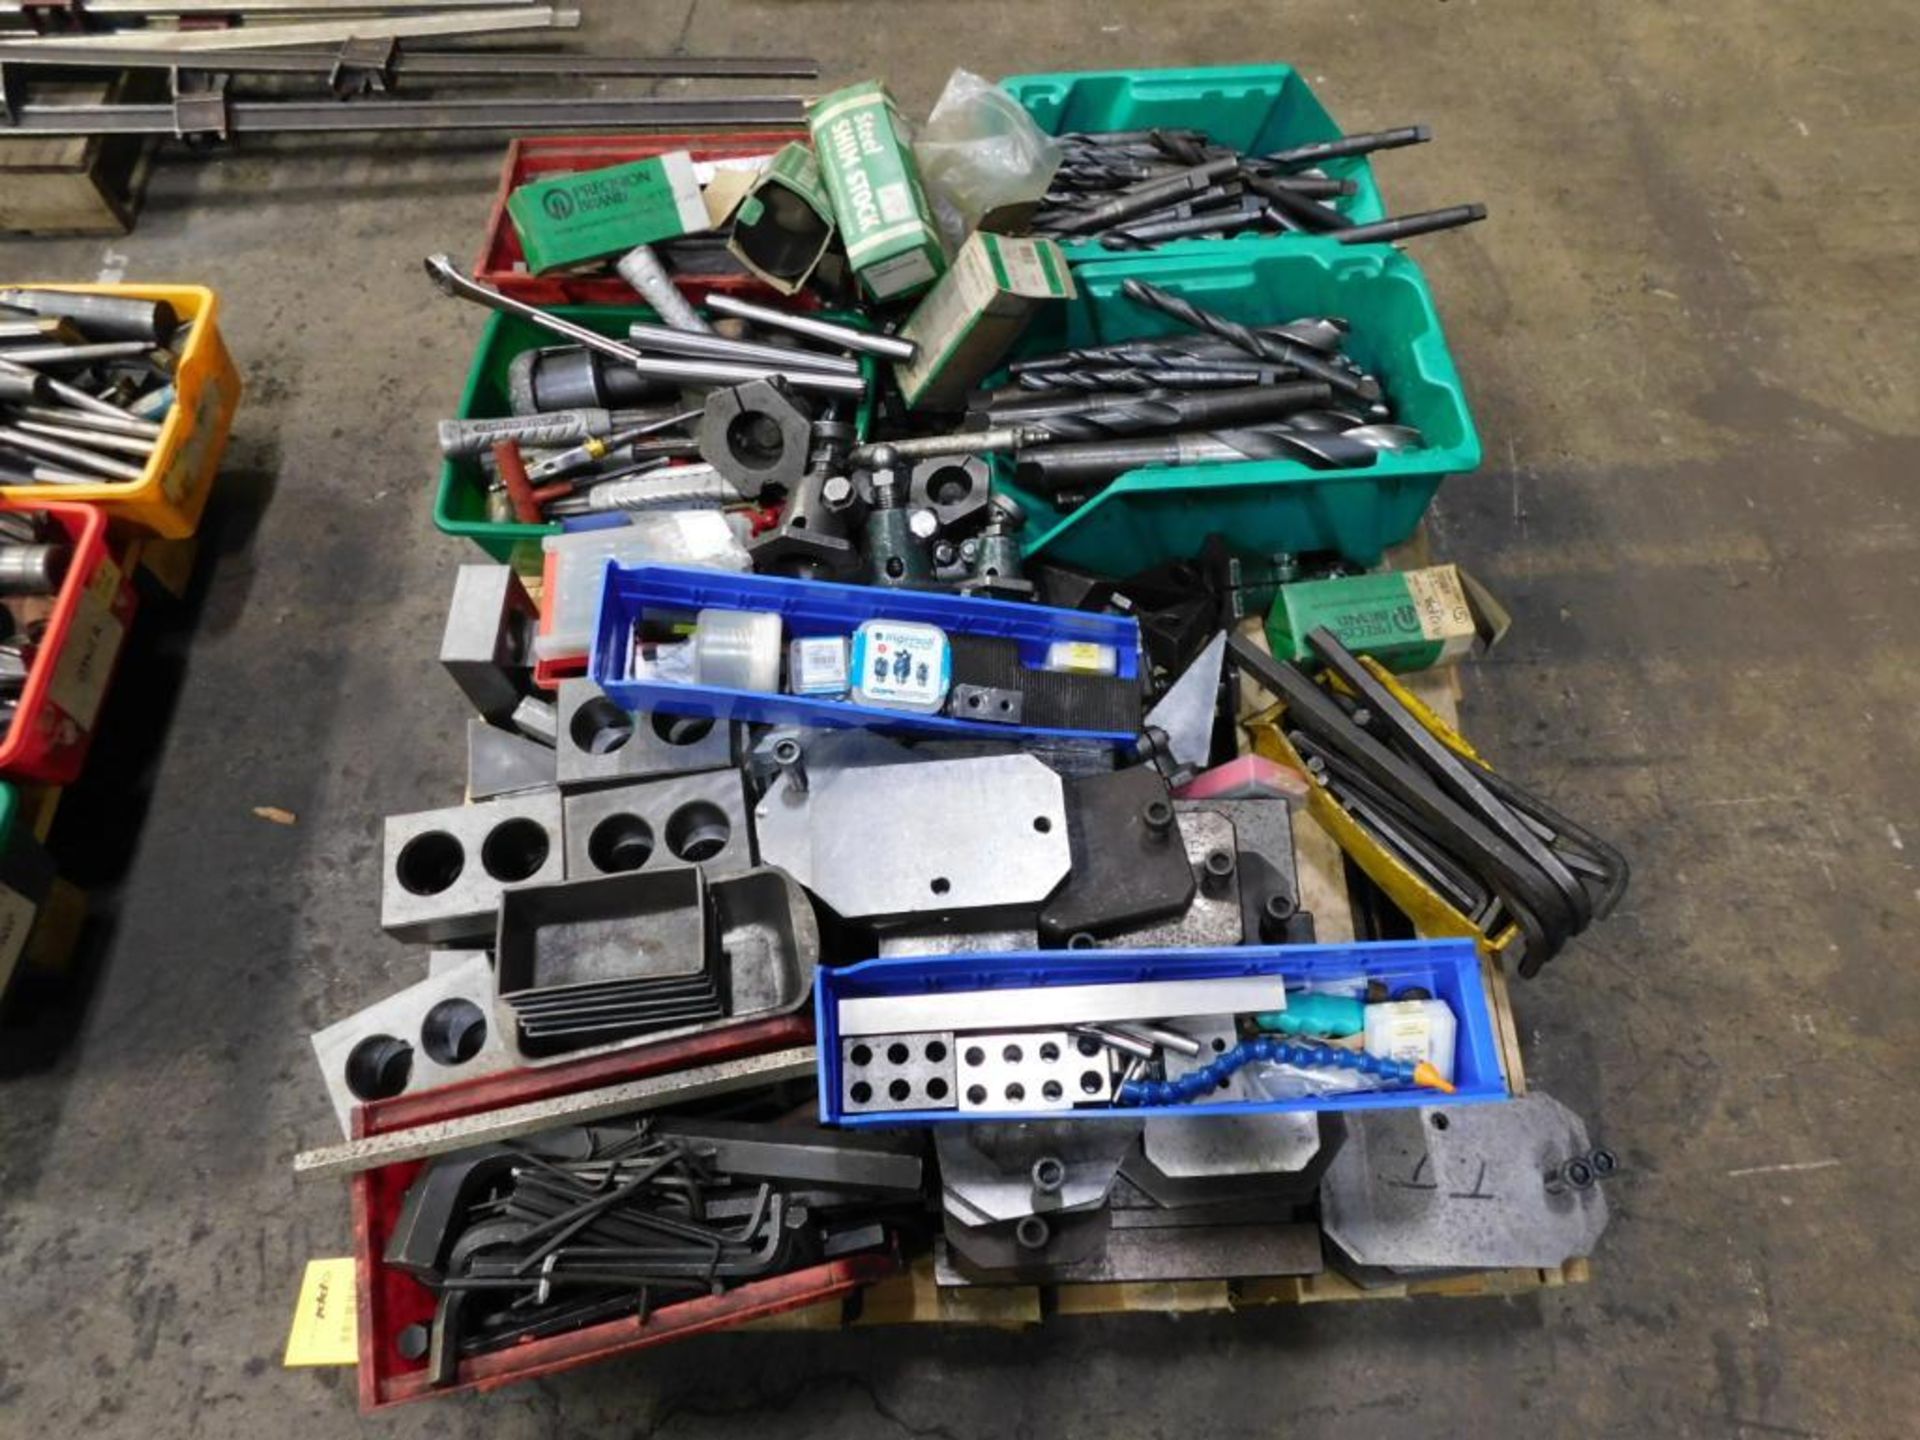 LOT: Assorted Taper Shank Drill Bits, Allen Wrenches, Tie-Down Equipment, Hammers, etc. in Crate - Image 2 of 4